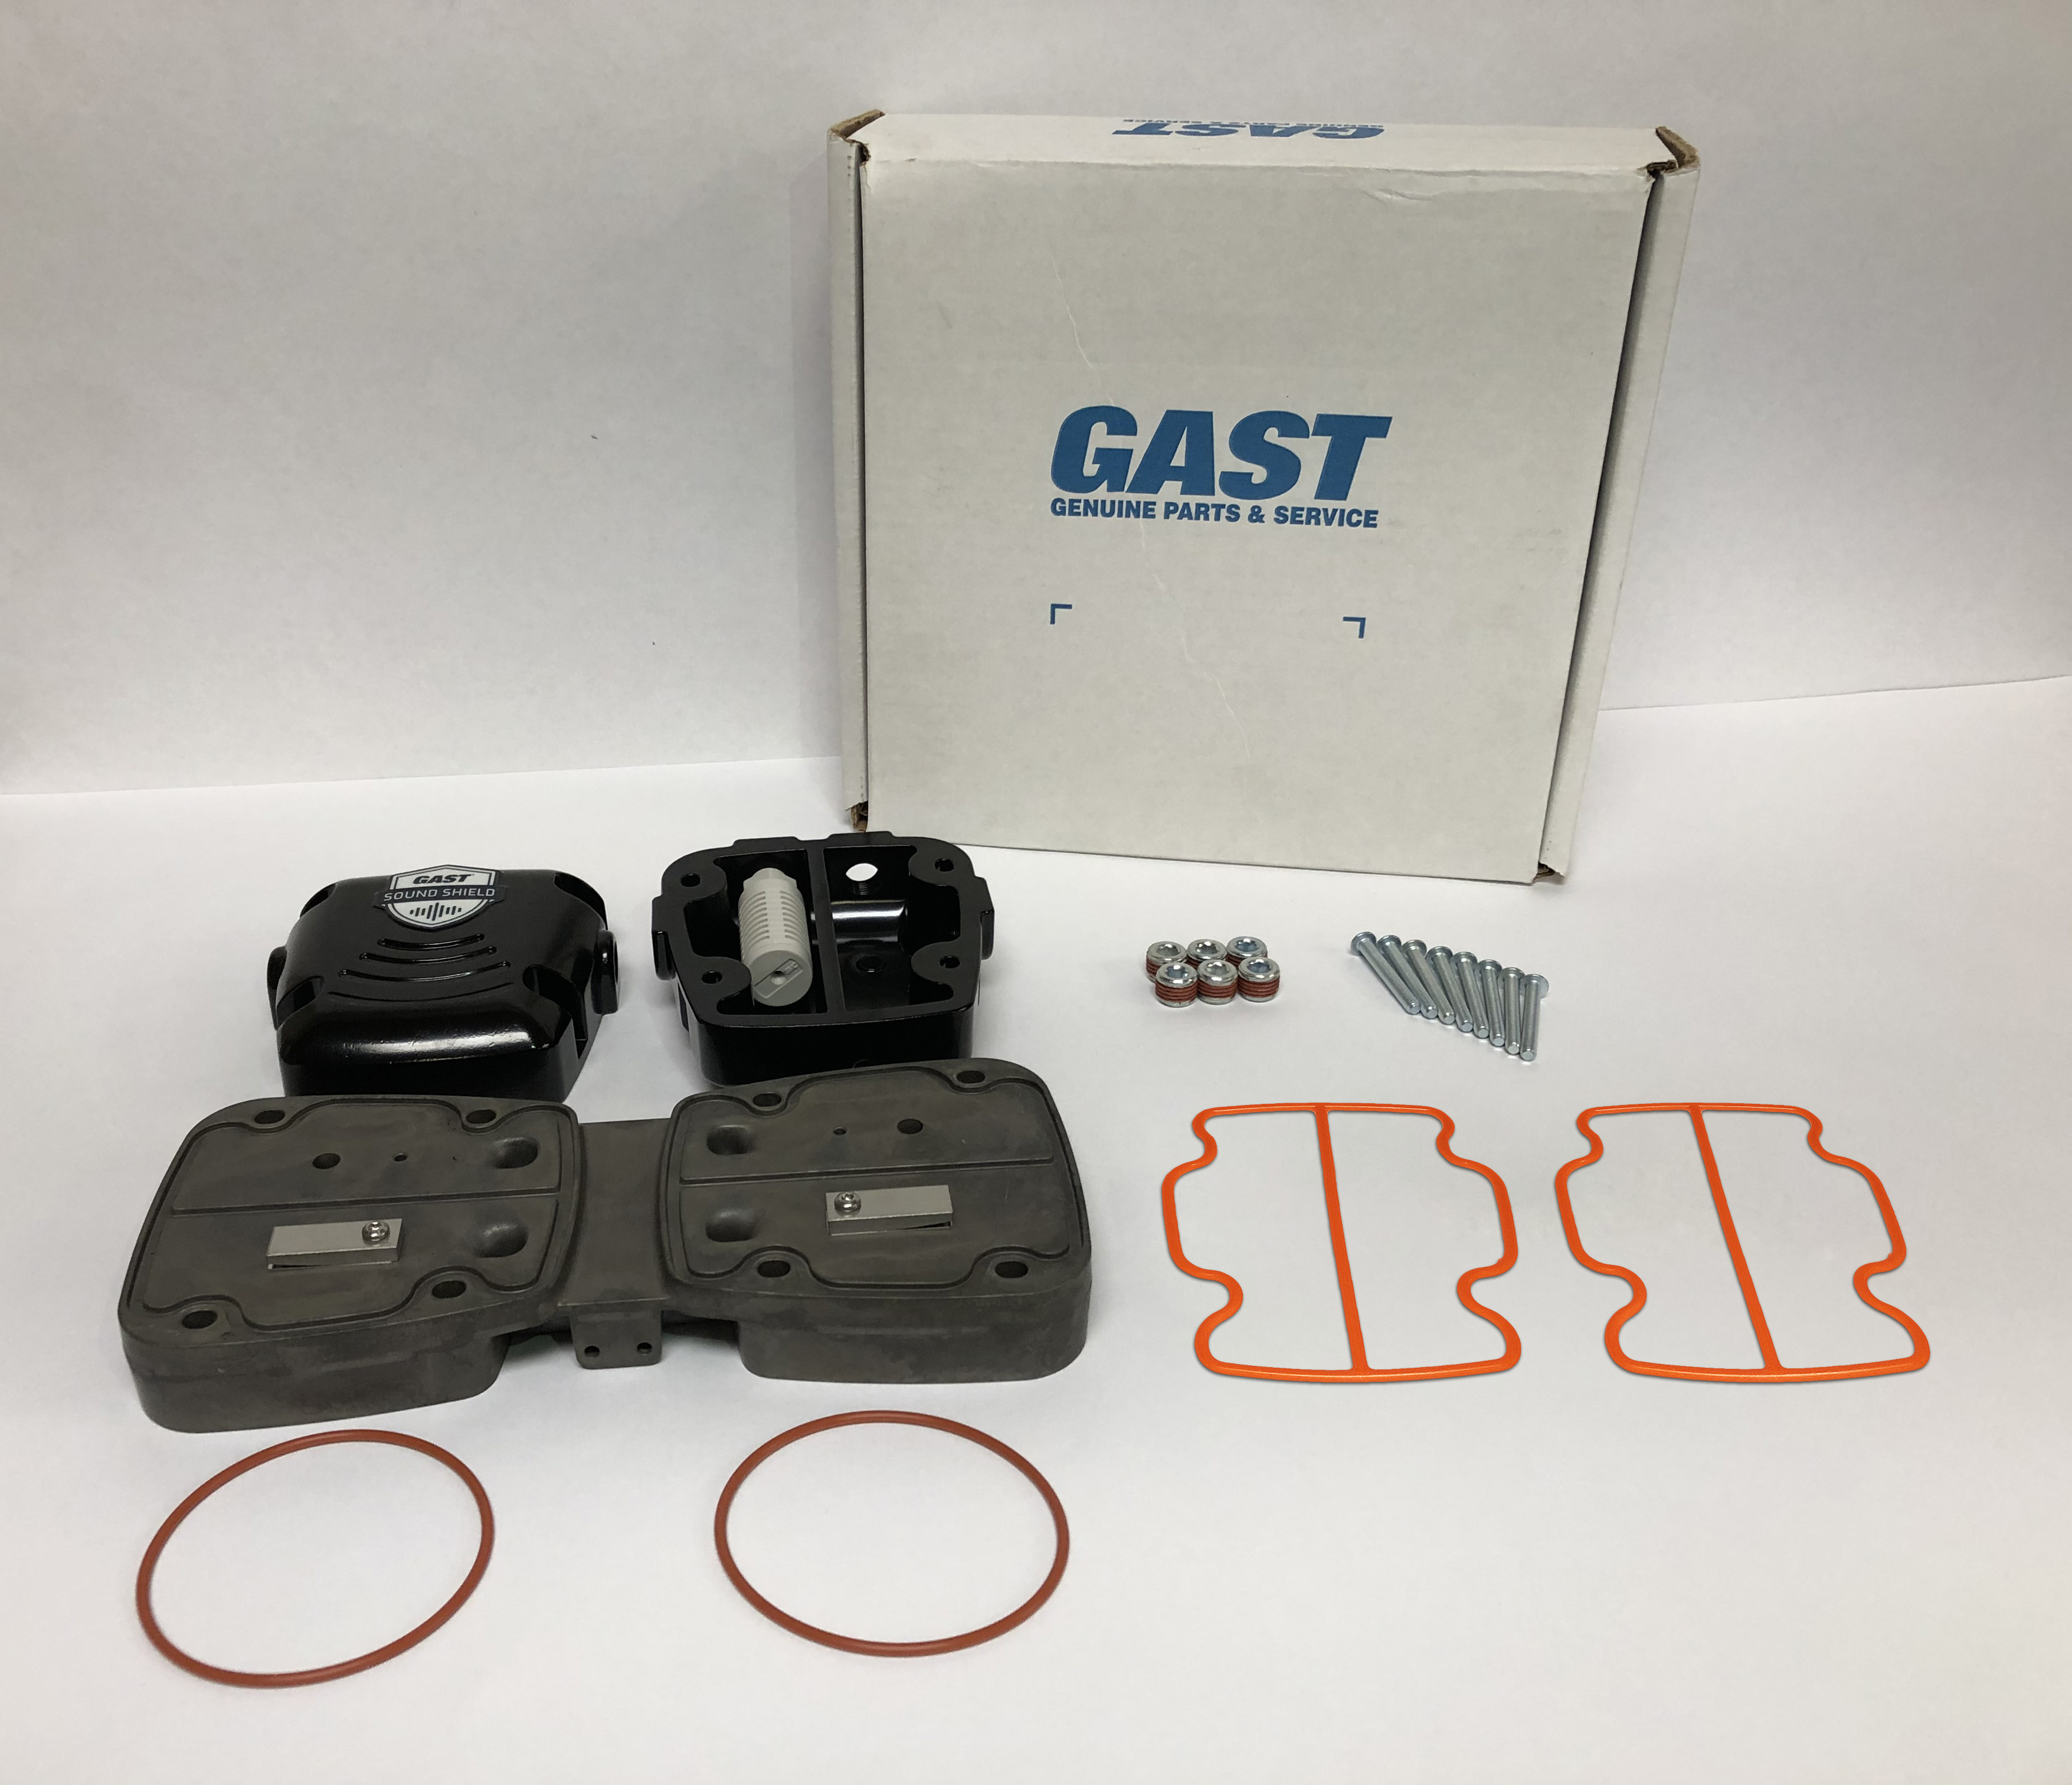 Content image of SSP87R6-01 kit featuring Gast branded packaging